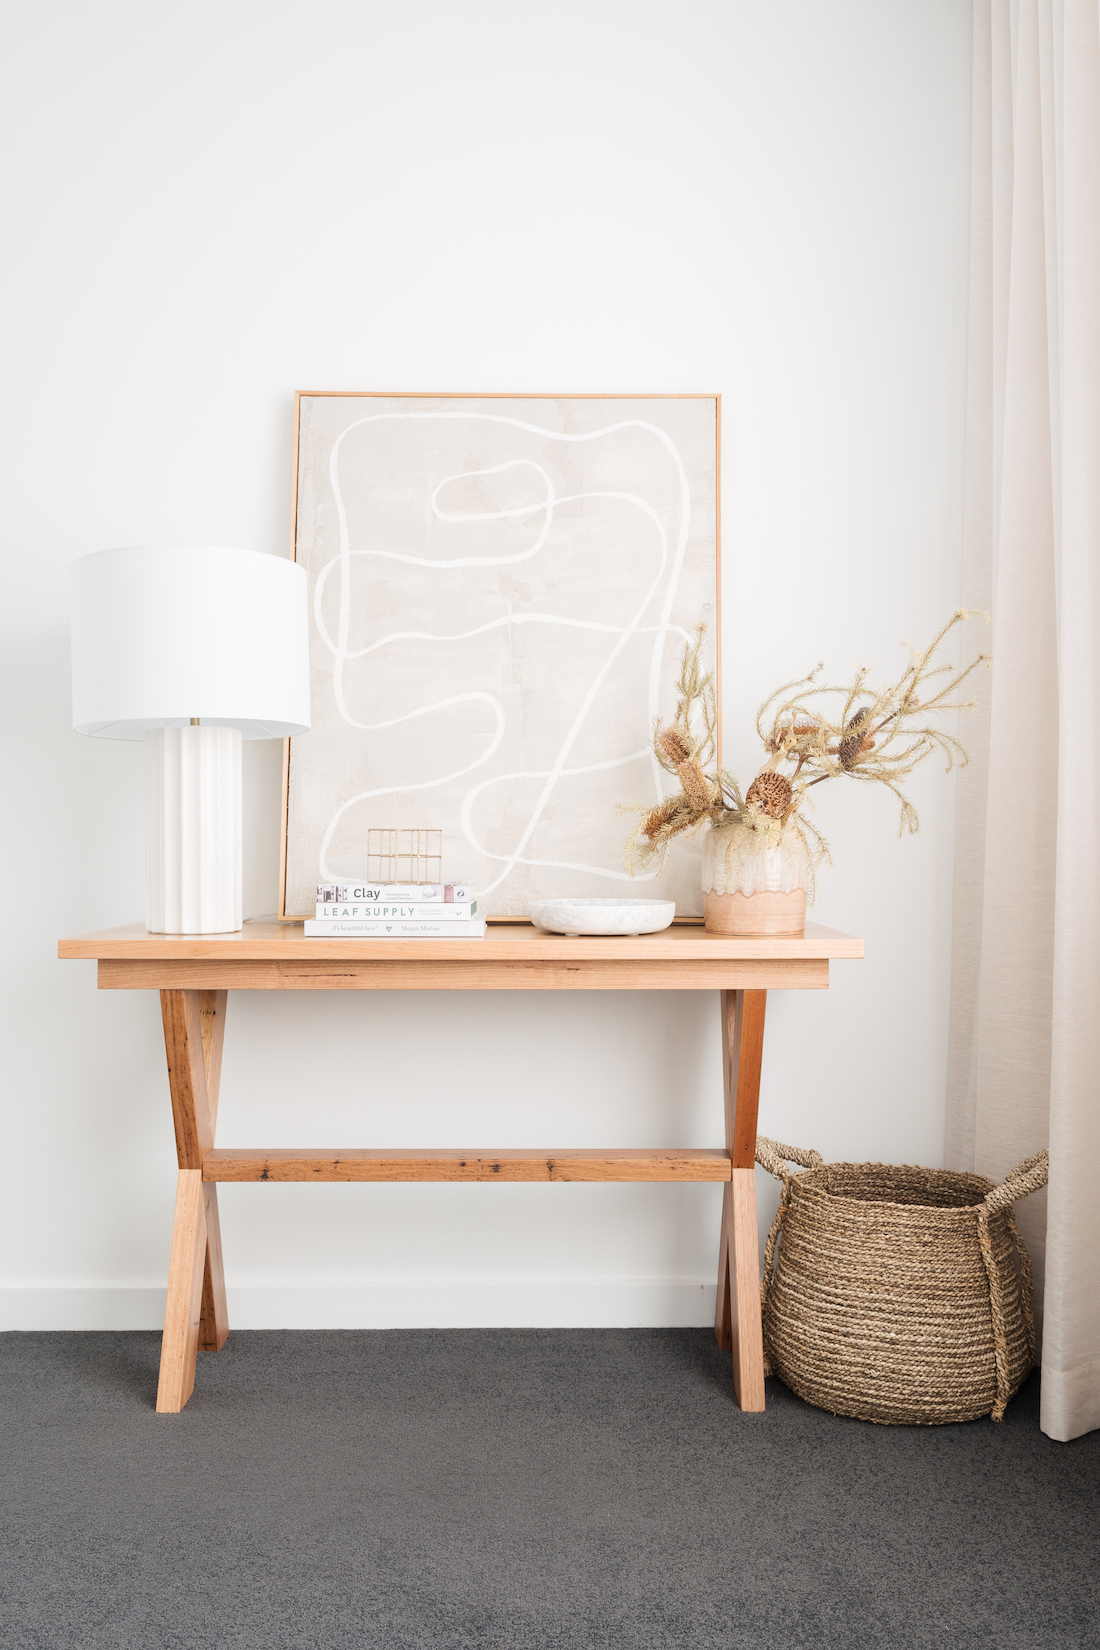 Styling a sideboard or hall table